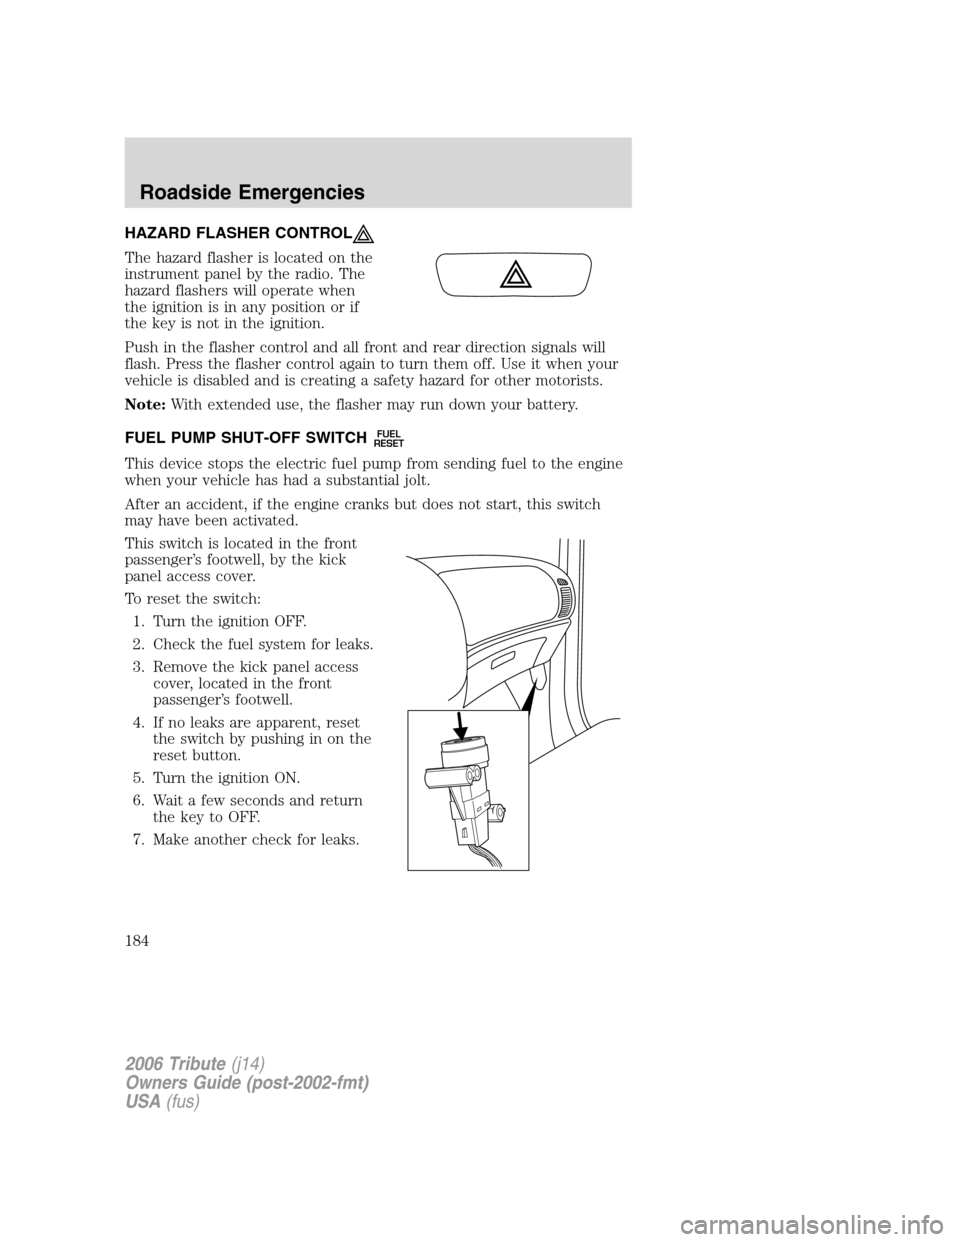 MAZDA MODEL TRIBUTE 2006  Owners Manual (in English) HAZARD FLASHER CONTROL
The hazard flasher is located on the
instrument panel by the radio. The
hazard flashers will operate when
the ignition is in any position or if
the key is not in the ignition.
P